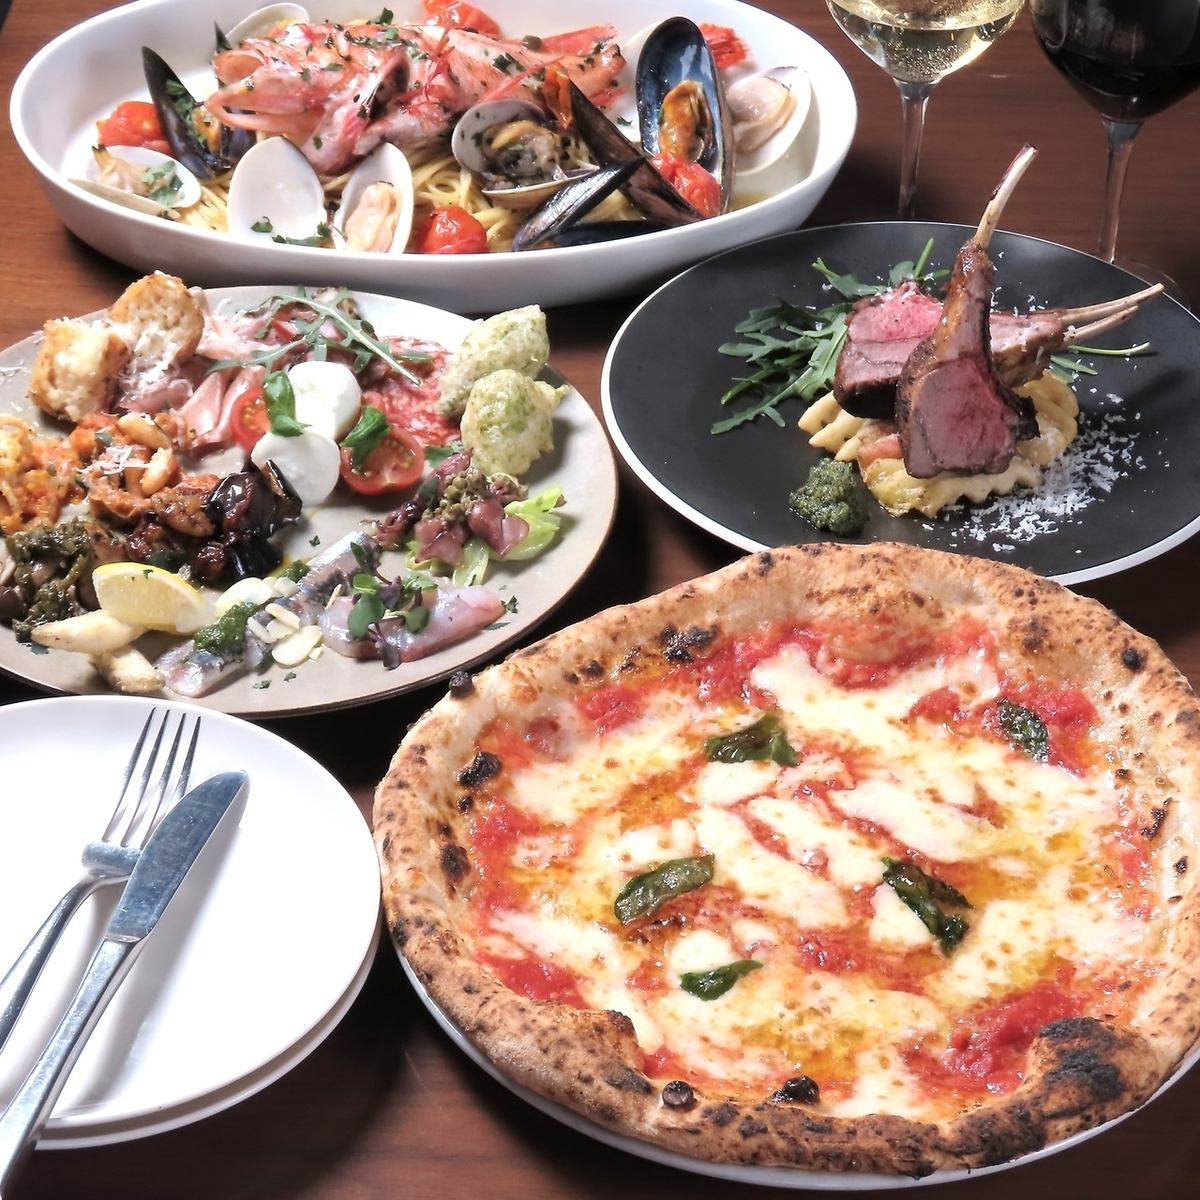 [4 minutes walk from Kamata Station] A restaurant where you can enjoy authentic Neapolitan pizza made in a wood-fired oven♪